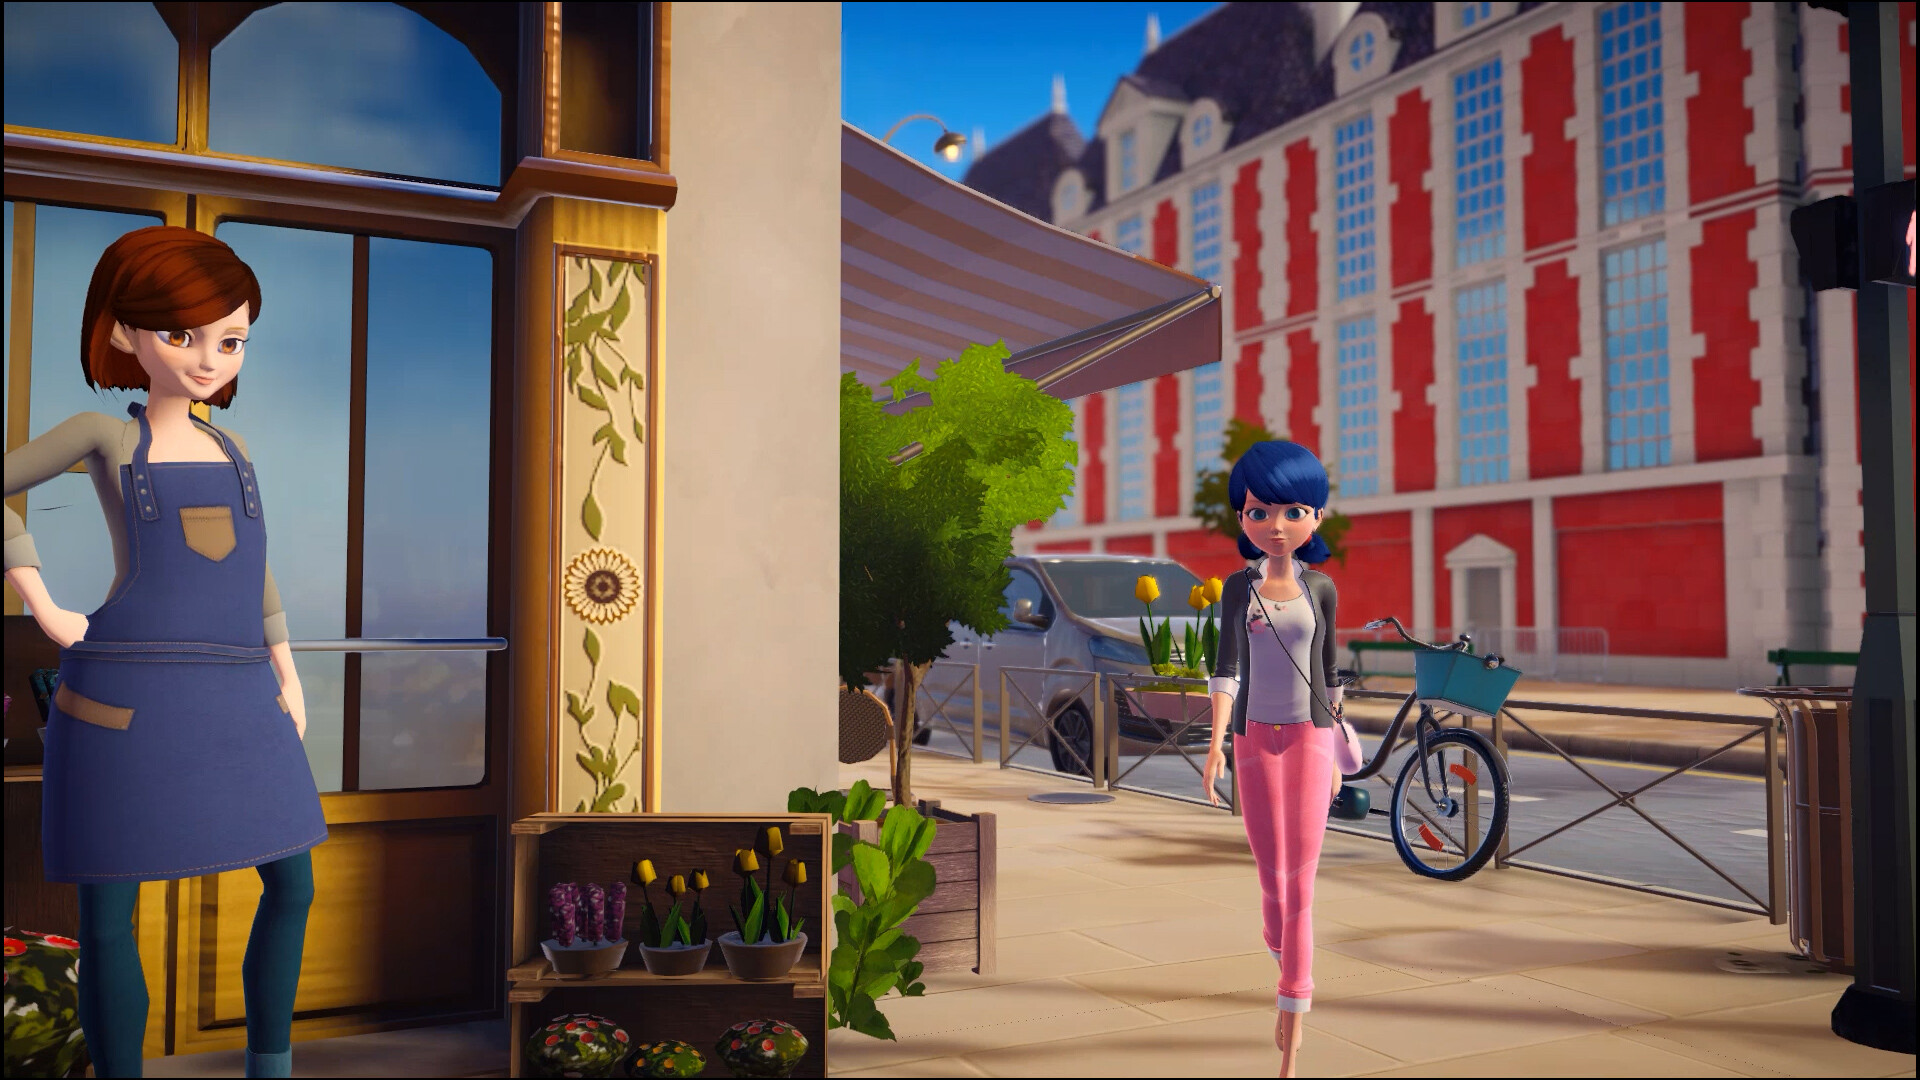 Buy Miraculous: Rise of the Sphinx Cat Noir and Ladybug Costume Pack -  Microsoft Store en-IL